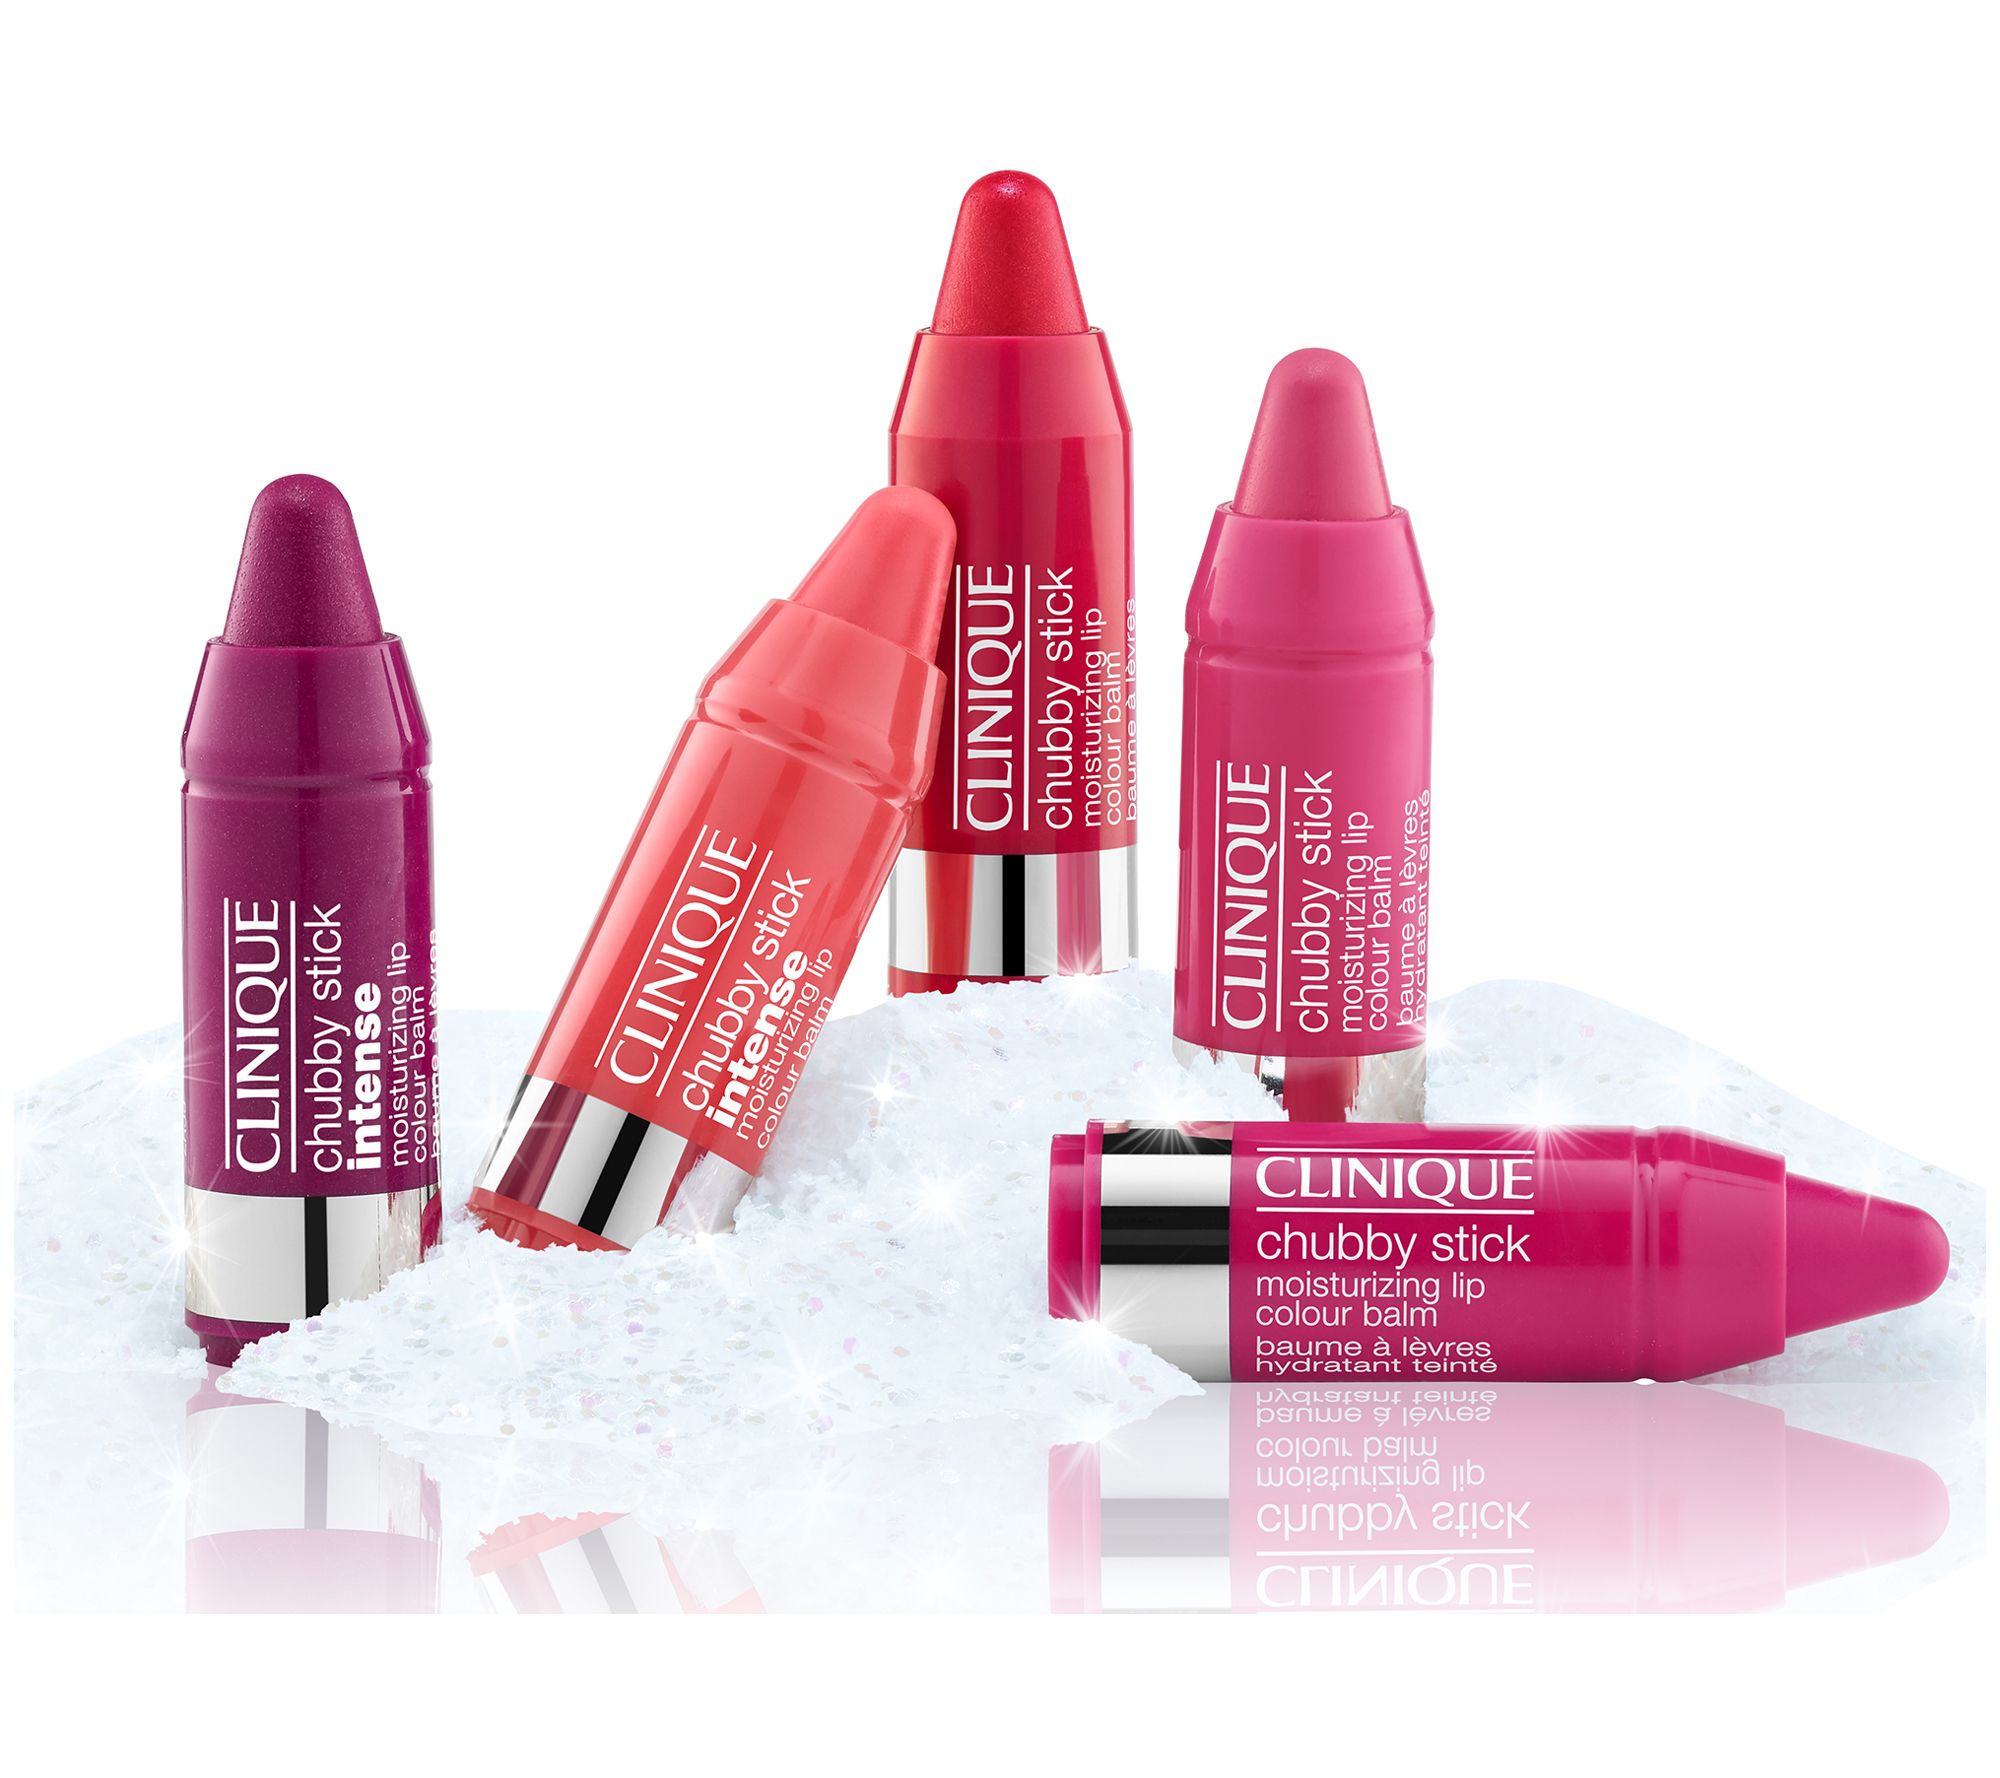 Clinique Bonus Gift Deals - Great Gift Ideas for a Beauty Lover!